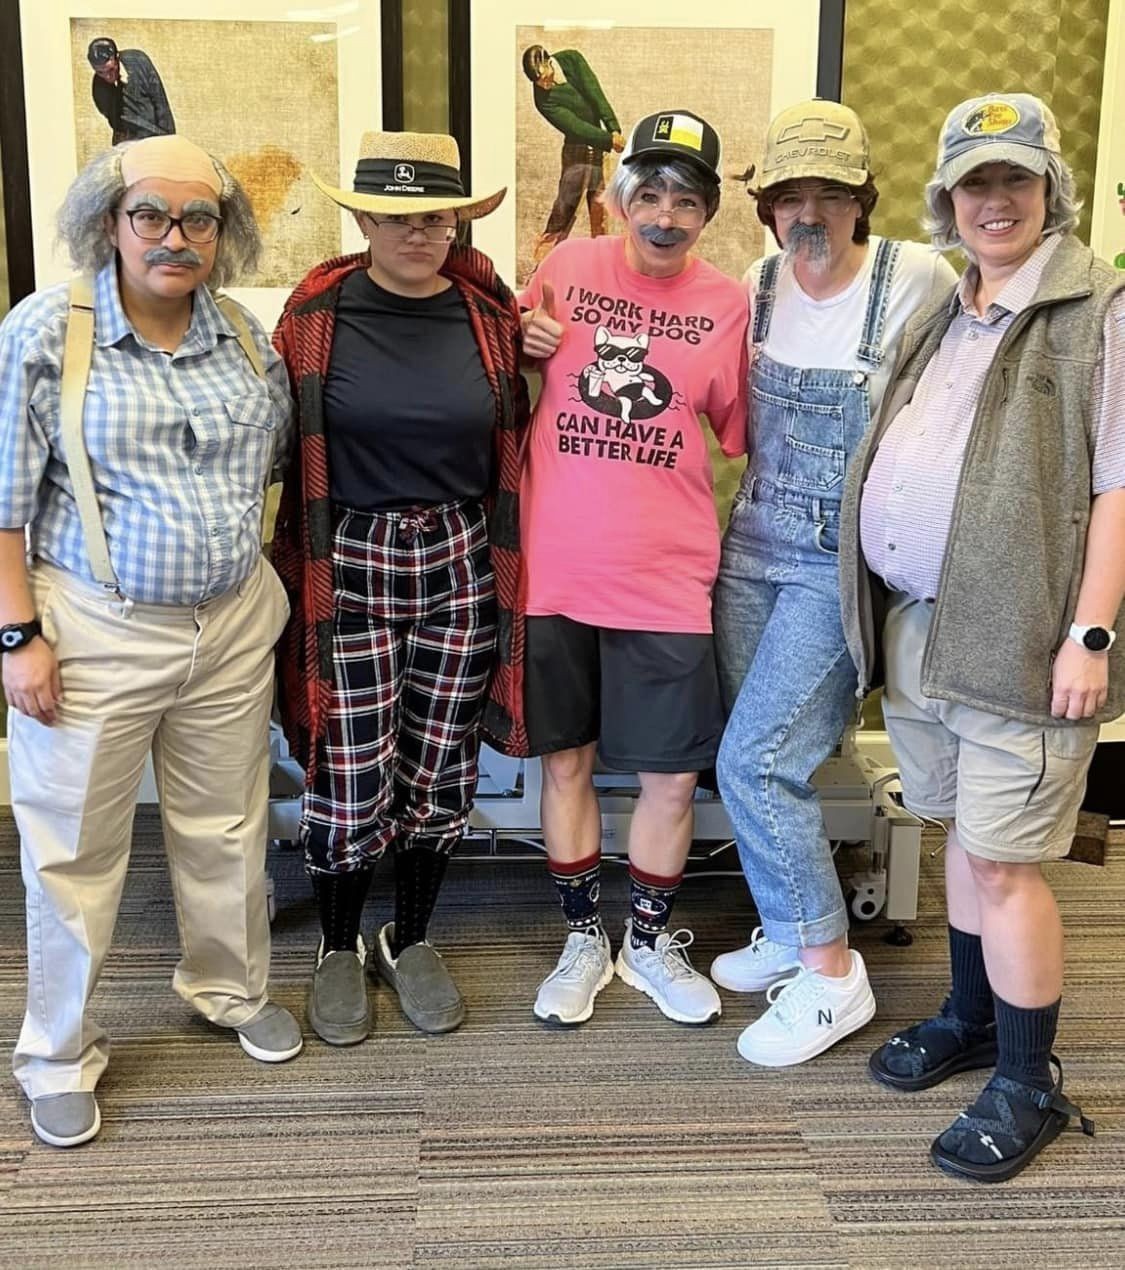 Halloween - dressing up as seniors got a laugh from our residents!